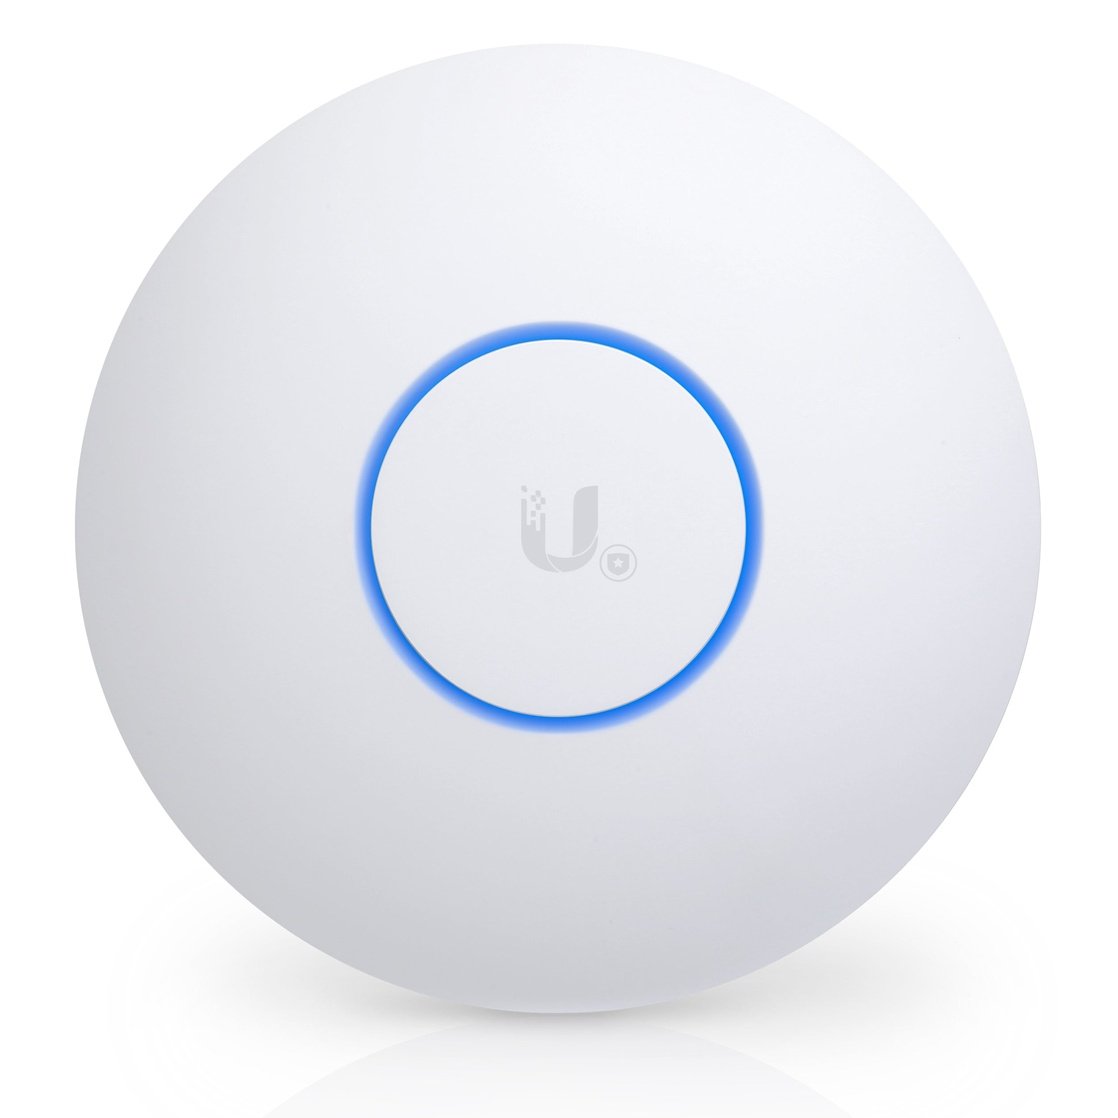 I5adbf404d9_e5511b35-e950-4cb1-885b-774342f805cd Ubiquiti Unifi Access Point NanoHD / Indoor / 2,4 &amp; 5 GHz / AC Wave 2 / 4x4 MIMO / UAP-NanoHD-5 / 5er Pack Accesspoint ubiquiti WIFI wifi 6 router